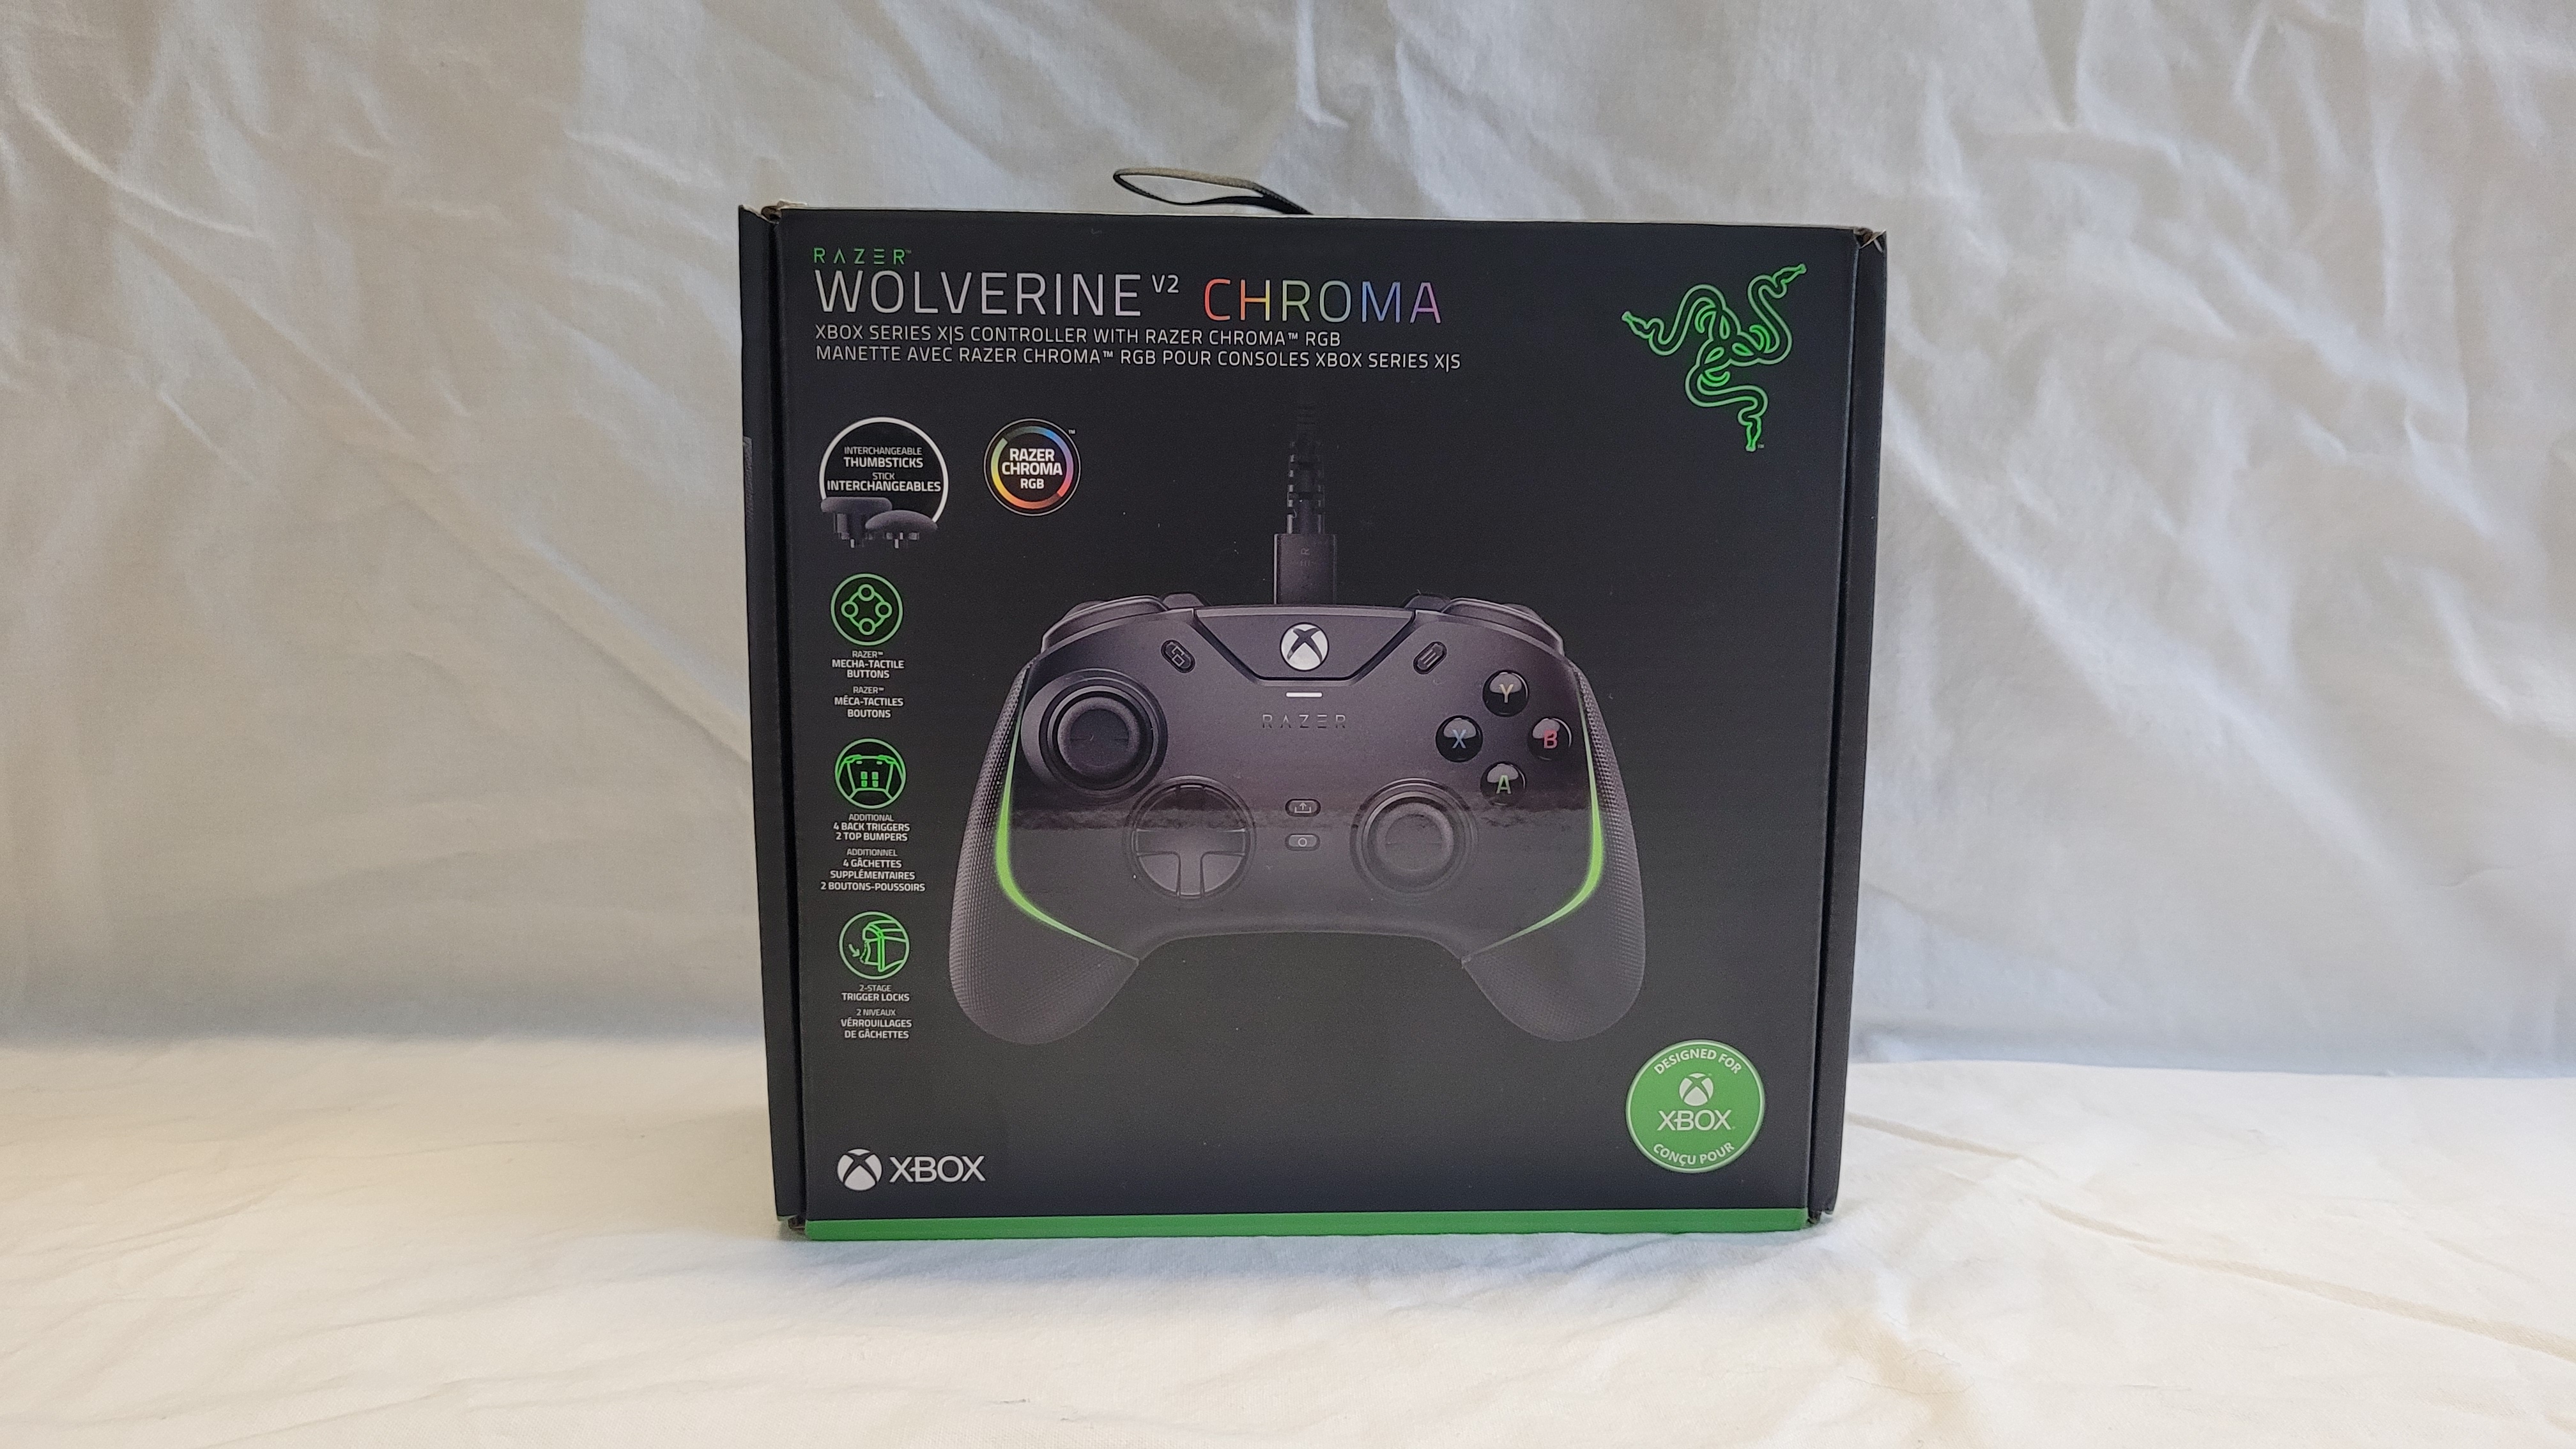 Razer Wolverine Xbox X|S Contents Series - Controller Satisfaction TechPowerUp Chroma Packaging, - Review & Mecha-Tactile Software | V2